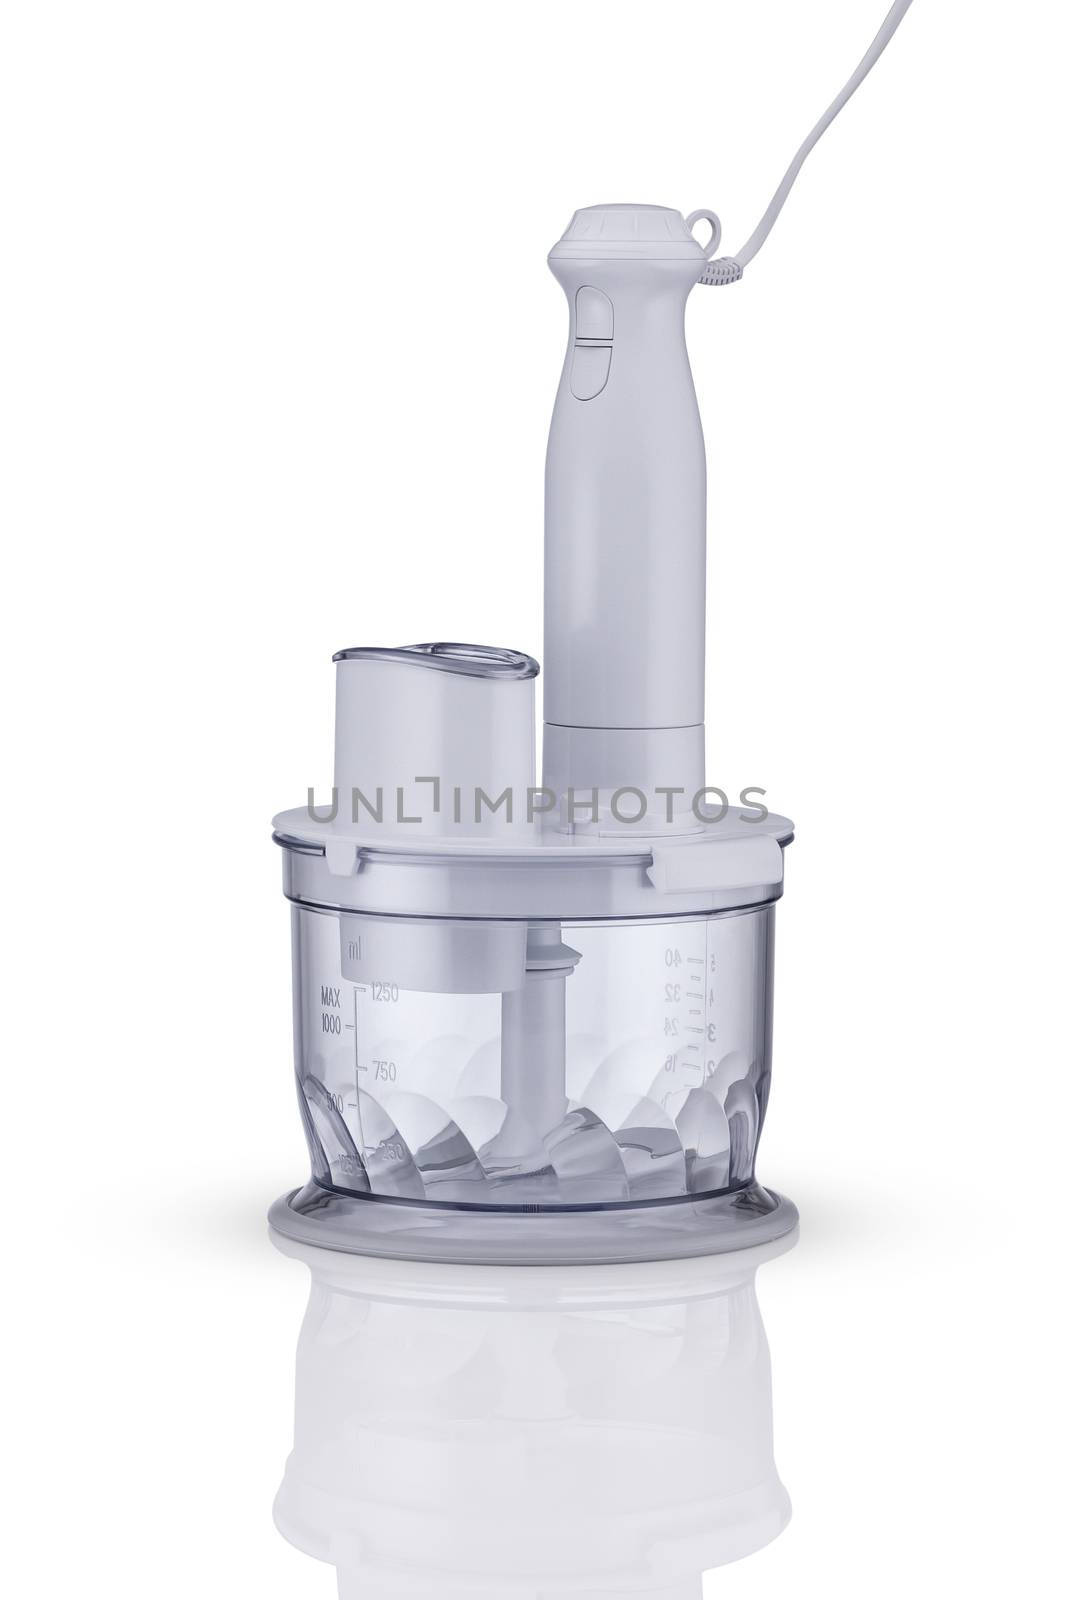 electric blender with the container on a white background. kitchen appliances